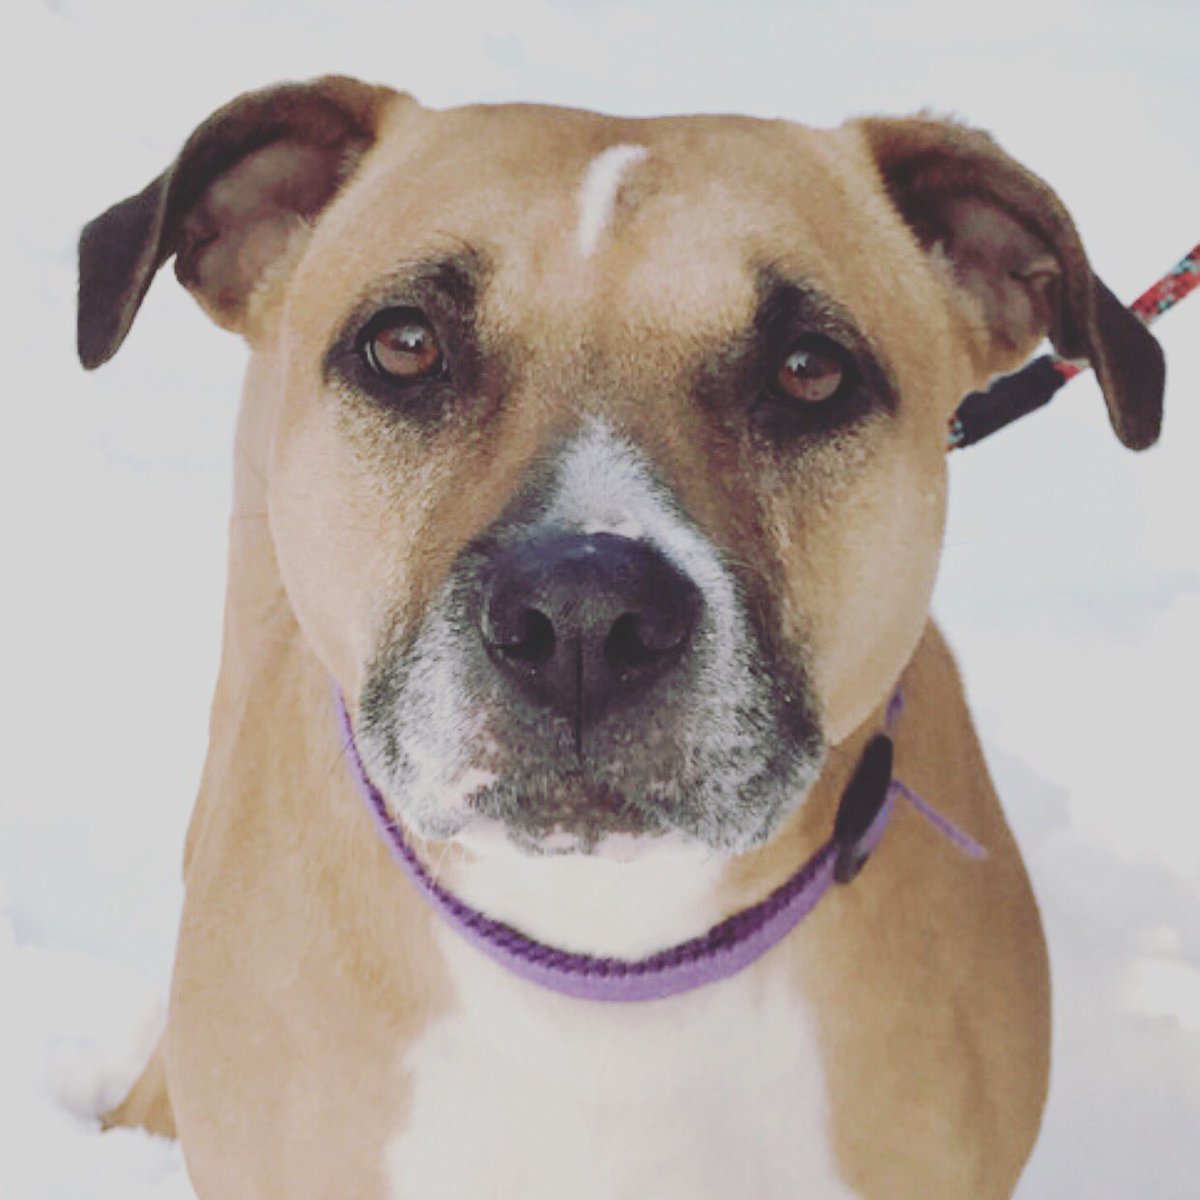 Amazing Lady urgently needs a home. She is located in Reading, PA but can be adopted to some in CT, NJ or NY. Lady is a loyal love bug that will provide you with snuggles and warmth. She also likes to be the center of attention and would prefer been the queen of the house!